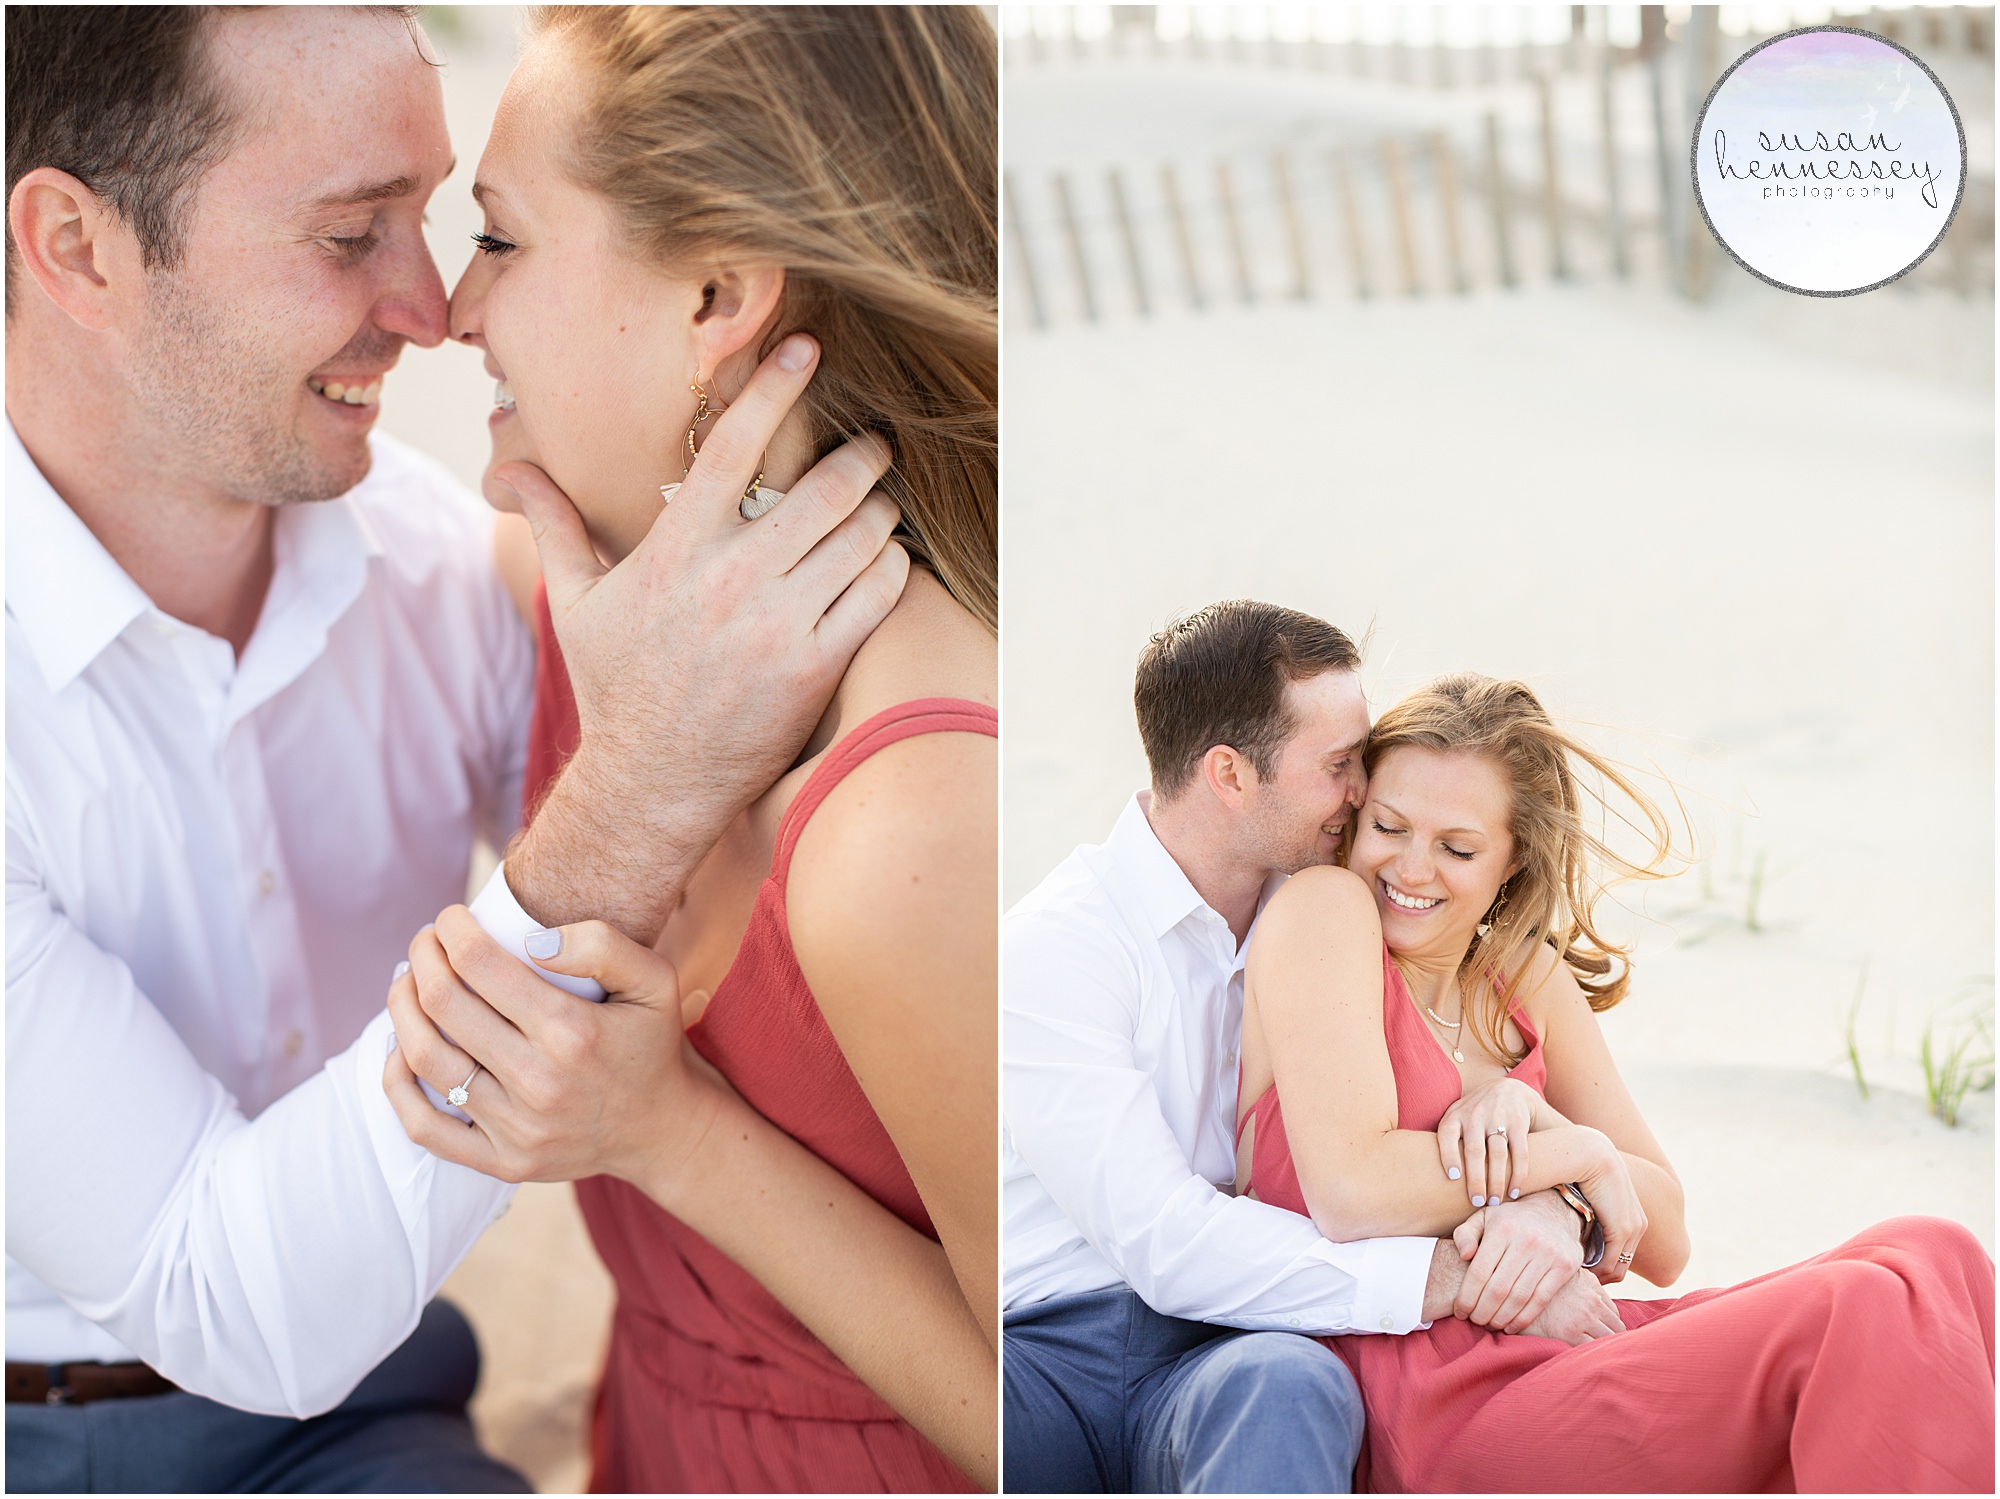 A happy engaged couple at their engagement session on the jersey shore.